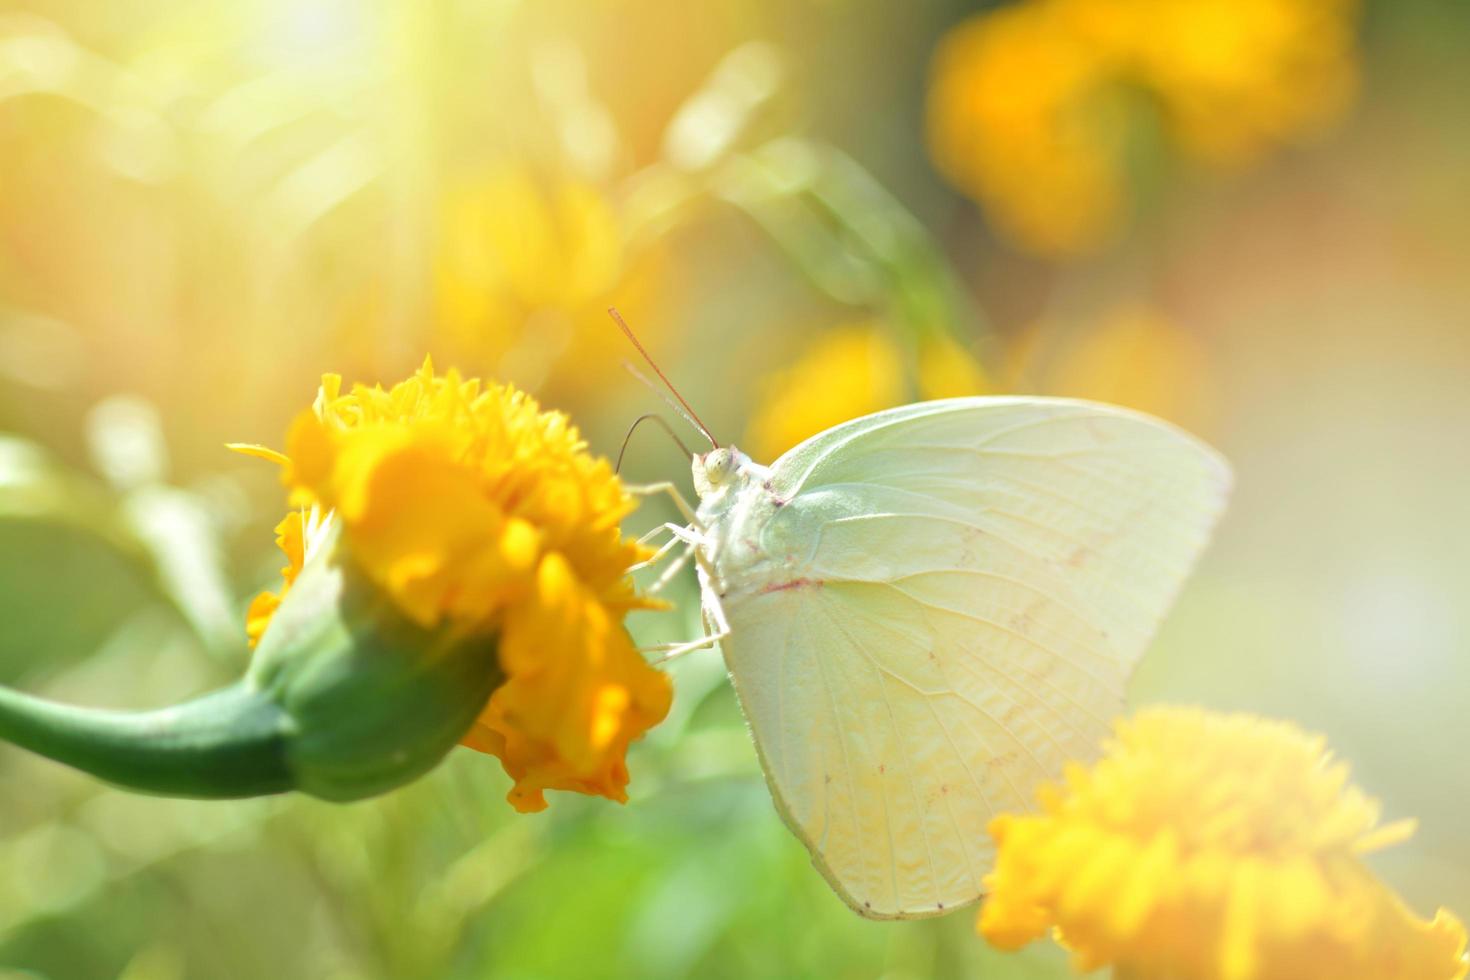 Green butterfly feeding on yellow marigold flower in the garden spring nature background photo